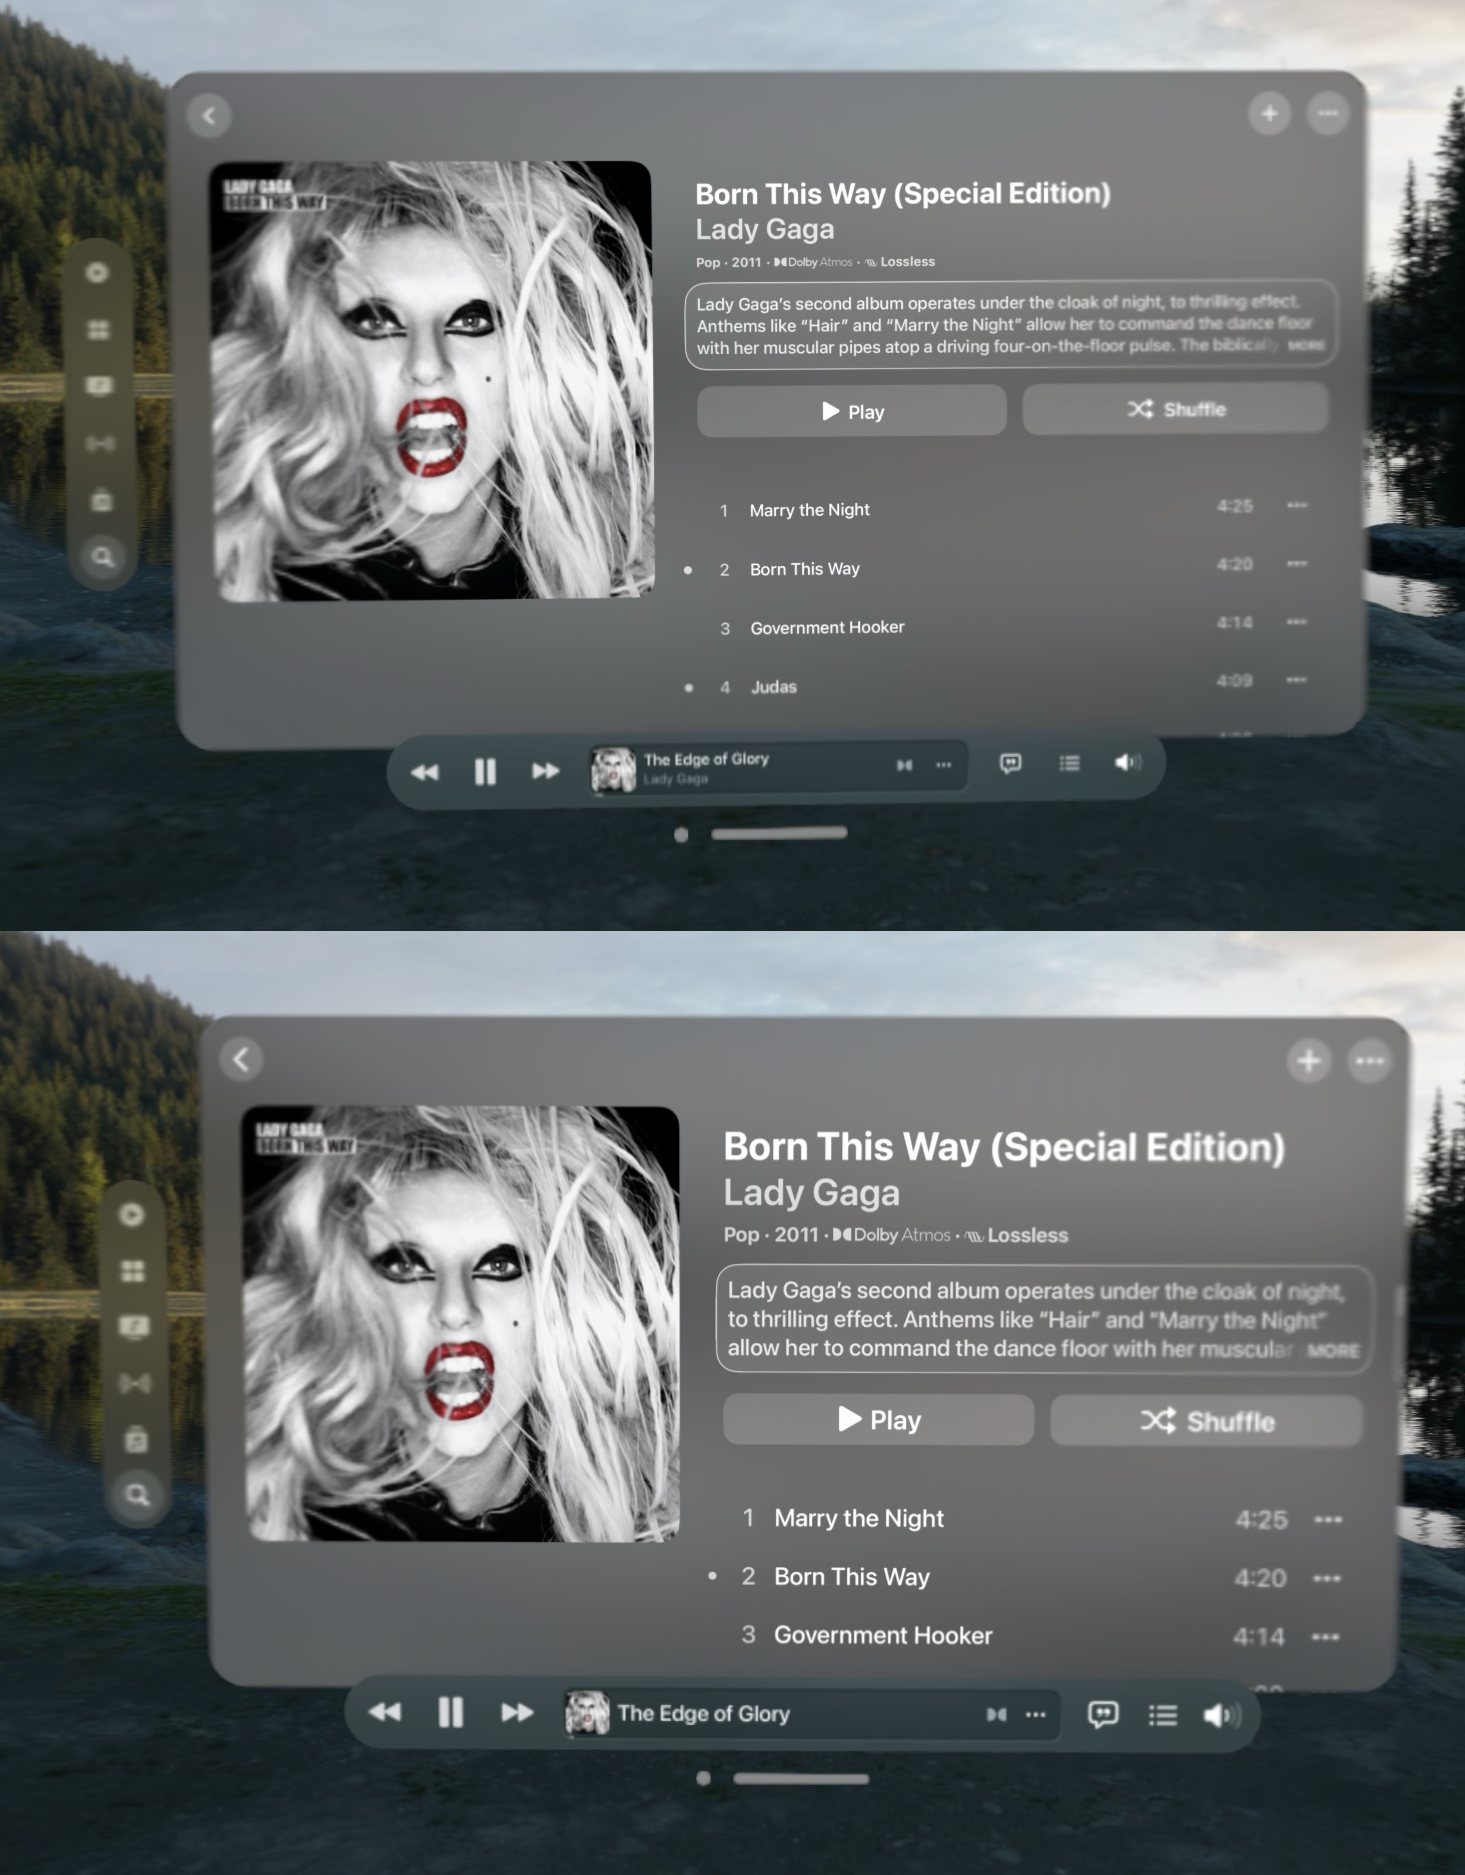 Comparison of two screenshots of the Music app. In both, the Album page for Born This Way by Lady Gaga is seen. The top screenshot shows it with a 100% text size, while the bottom shows it with 150% text size.